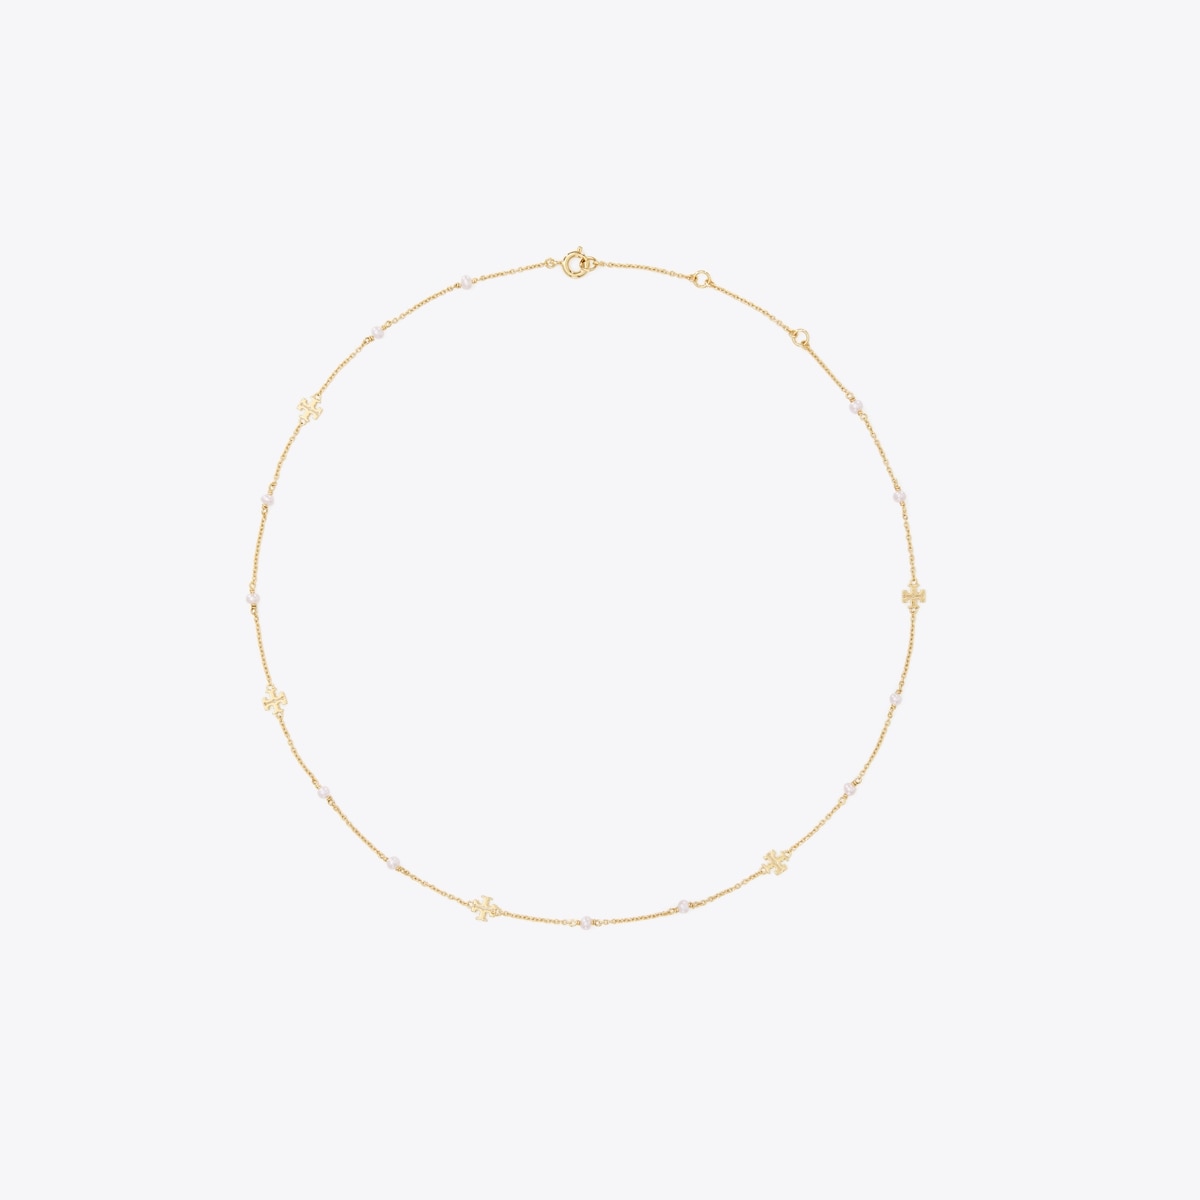 Kira Pearl Delicate Necklace: Women's Designer Necklaces | Tory Burch